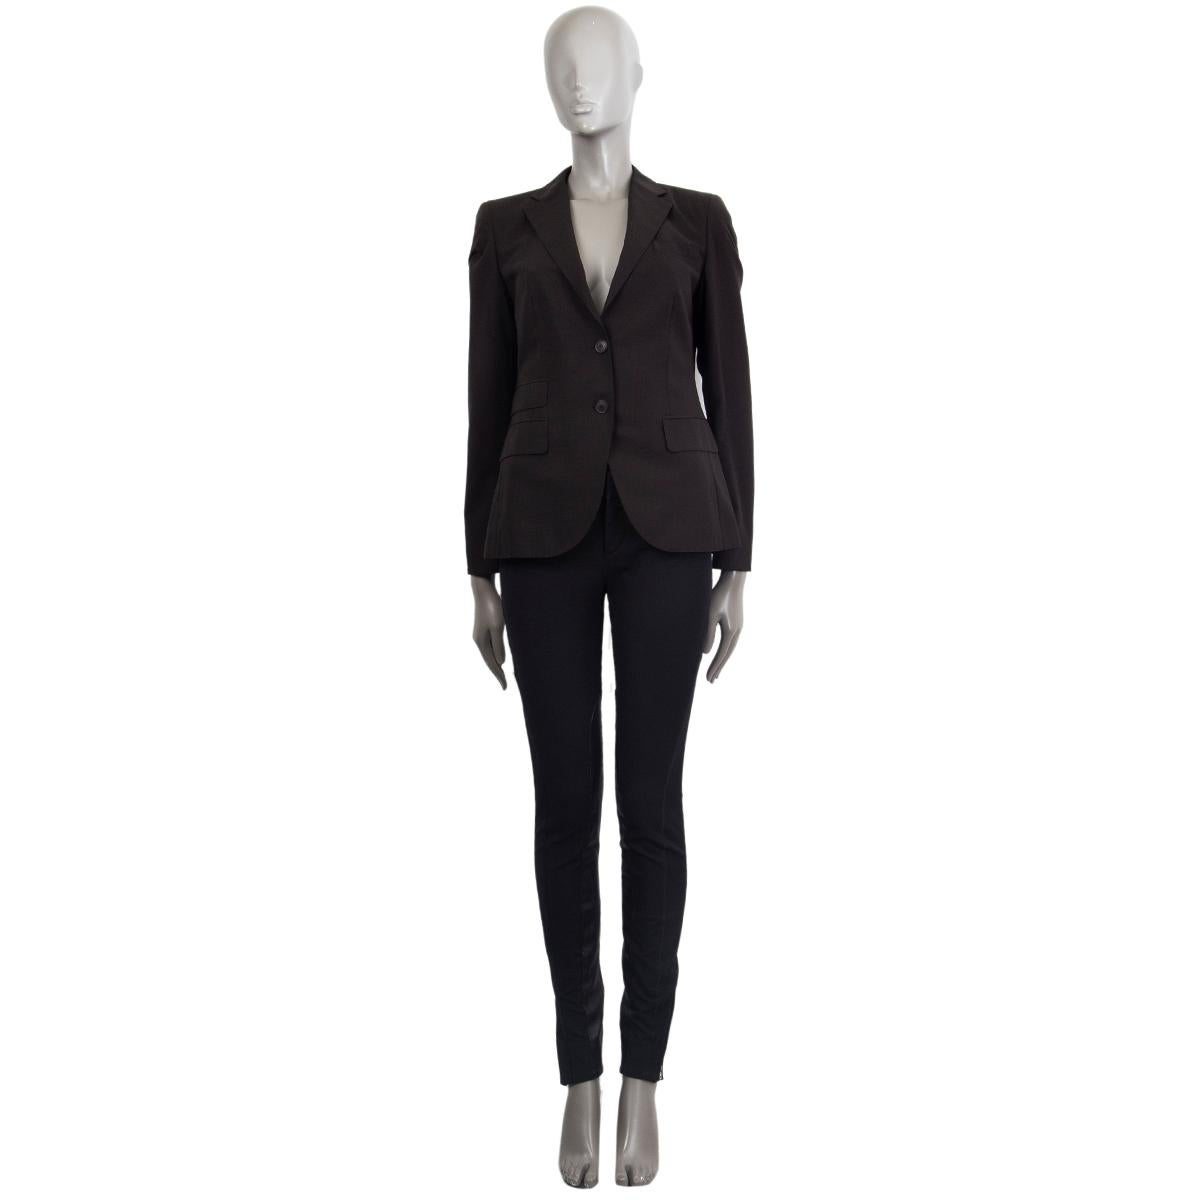 100% authentic AKRIS two-button blazer in black wool (100%) with a standart notch-collar, chest pocket, flap pocket and a double-flap pocket on the right side. Lined in black fabric viscose (100%). Closes with two buttons in the front.